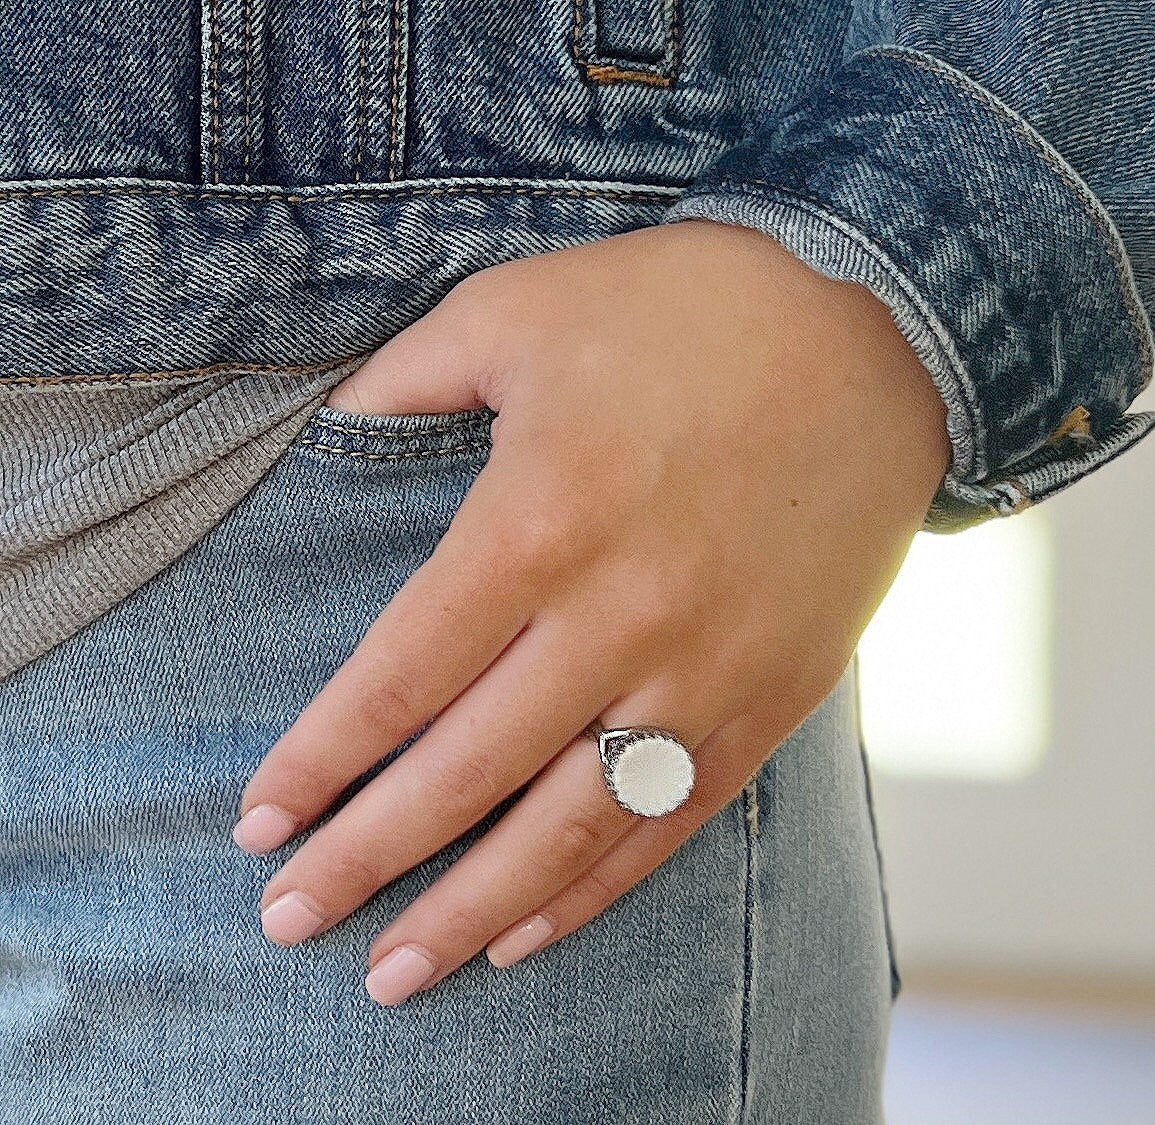 Vintage White Milk Glass Button Ring, Button Jewelry, Unique Gifts for Women, Sterling Silver Adjustable Ring